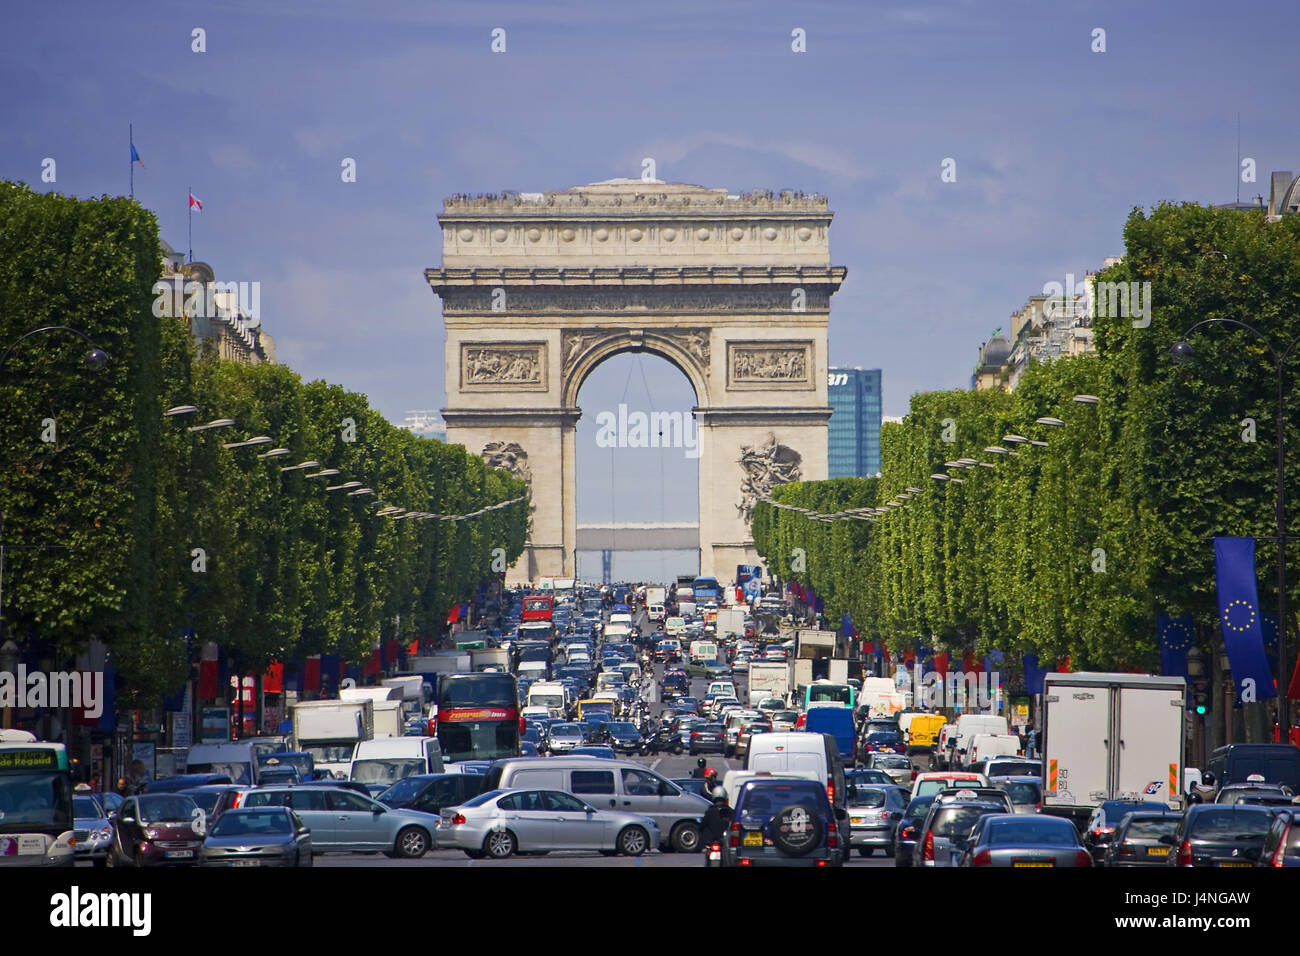 France, Paris, avenue of the Champs Elysees, triumphal arch, traffic, Stock Photo